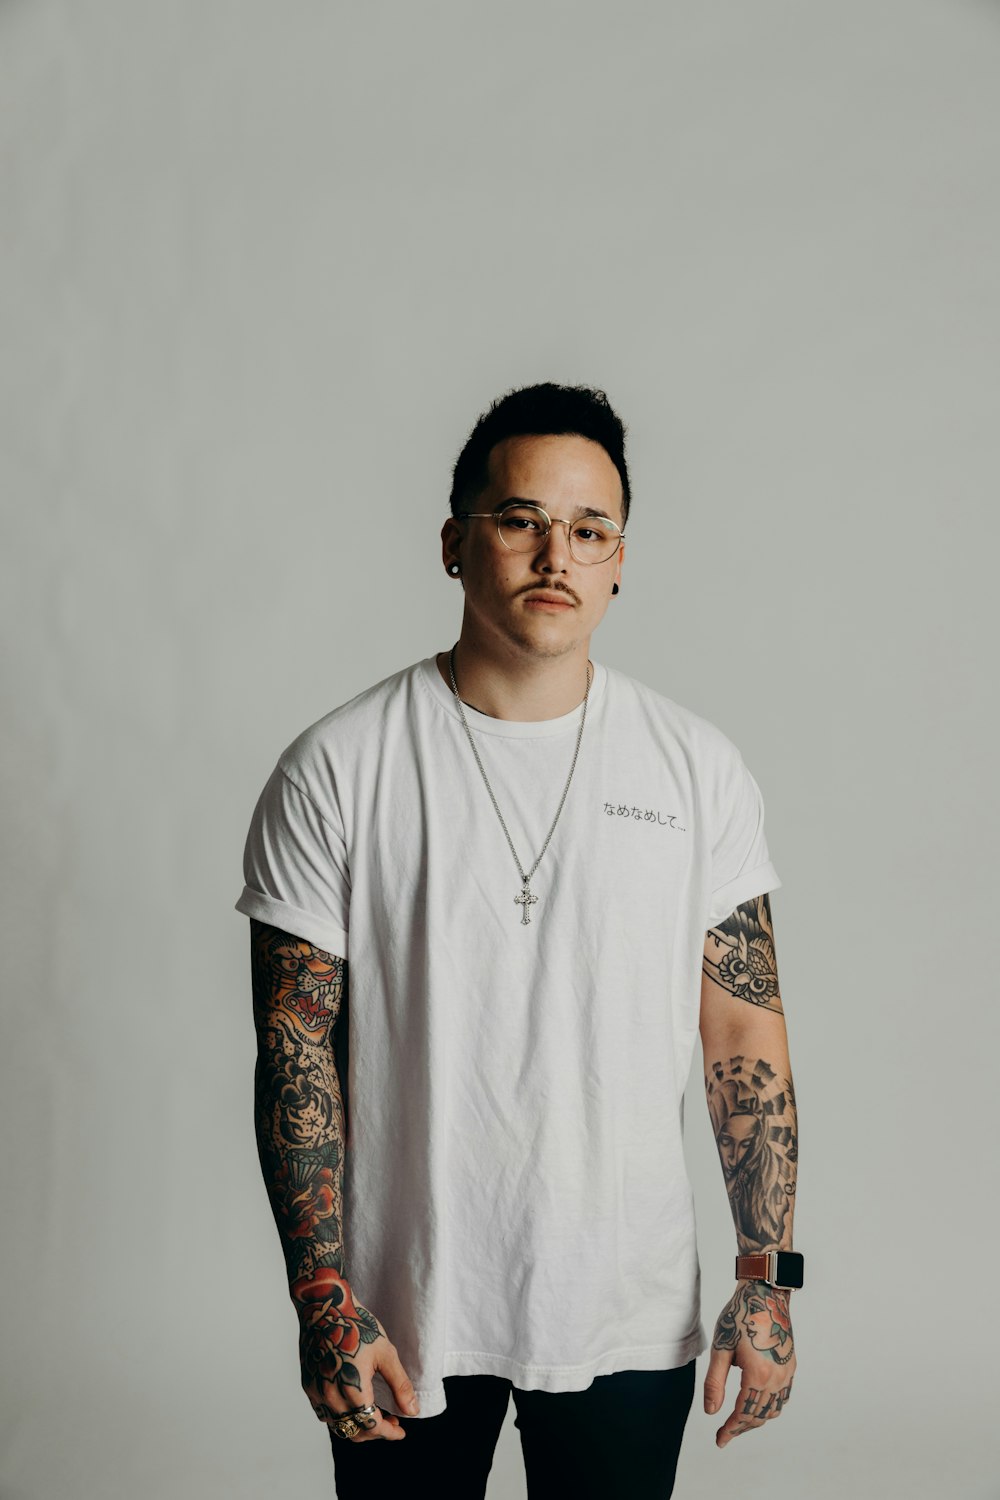 man in white crew neck t-shirt with black and red tattoo on arm